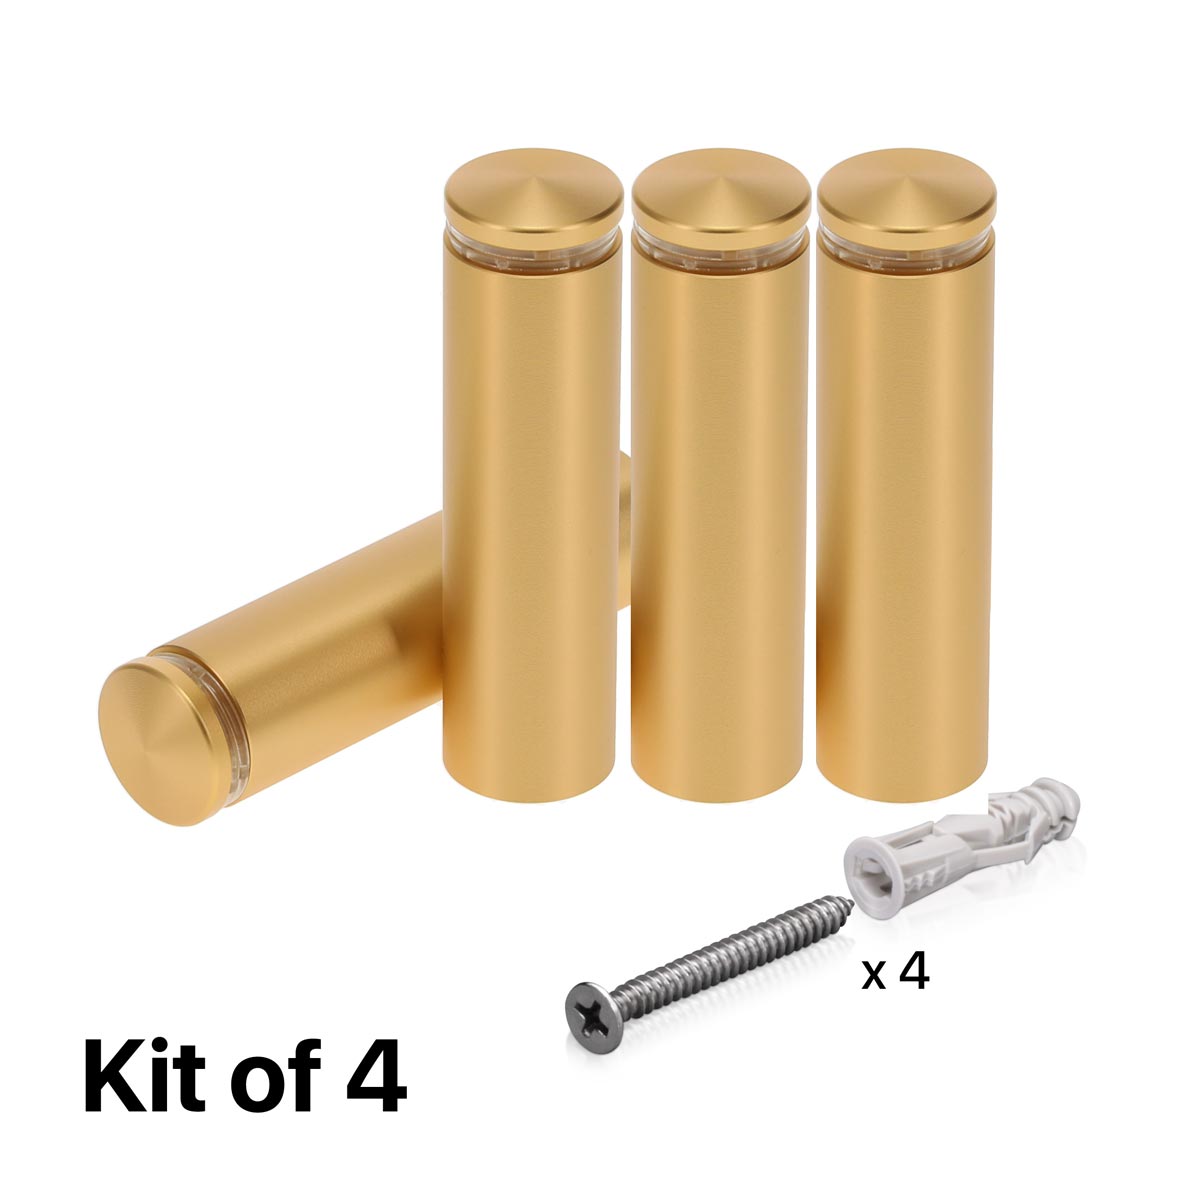 (Set of 4) 3/4'' Diameter X 2-1/2'' Barrel Length, Alumi. Rounded Head Standoffs, Matte Champagne Anodized Finish Standoff with (4) 2216Z Screws and (4) LANC1 Anchors for concrete or drywall (For In / Out use) [Required Material Hole Size: 7/16'']